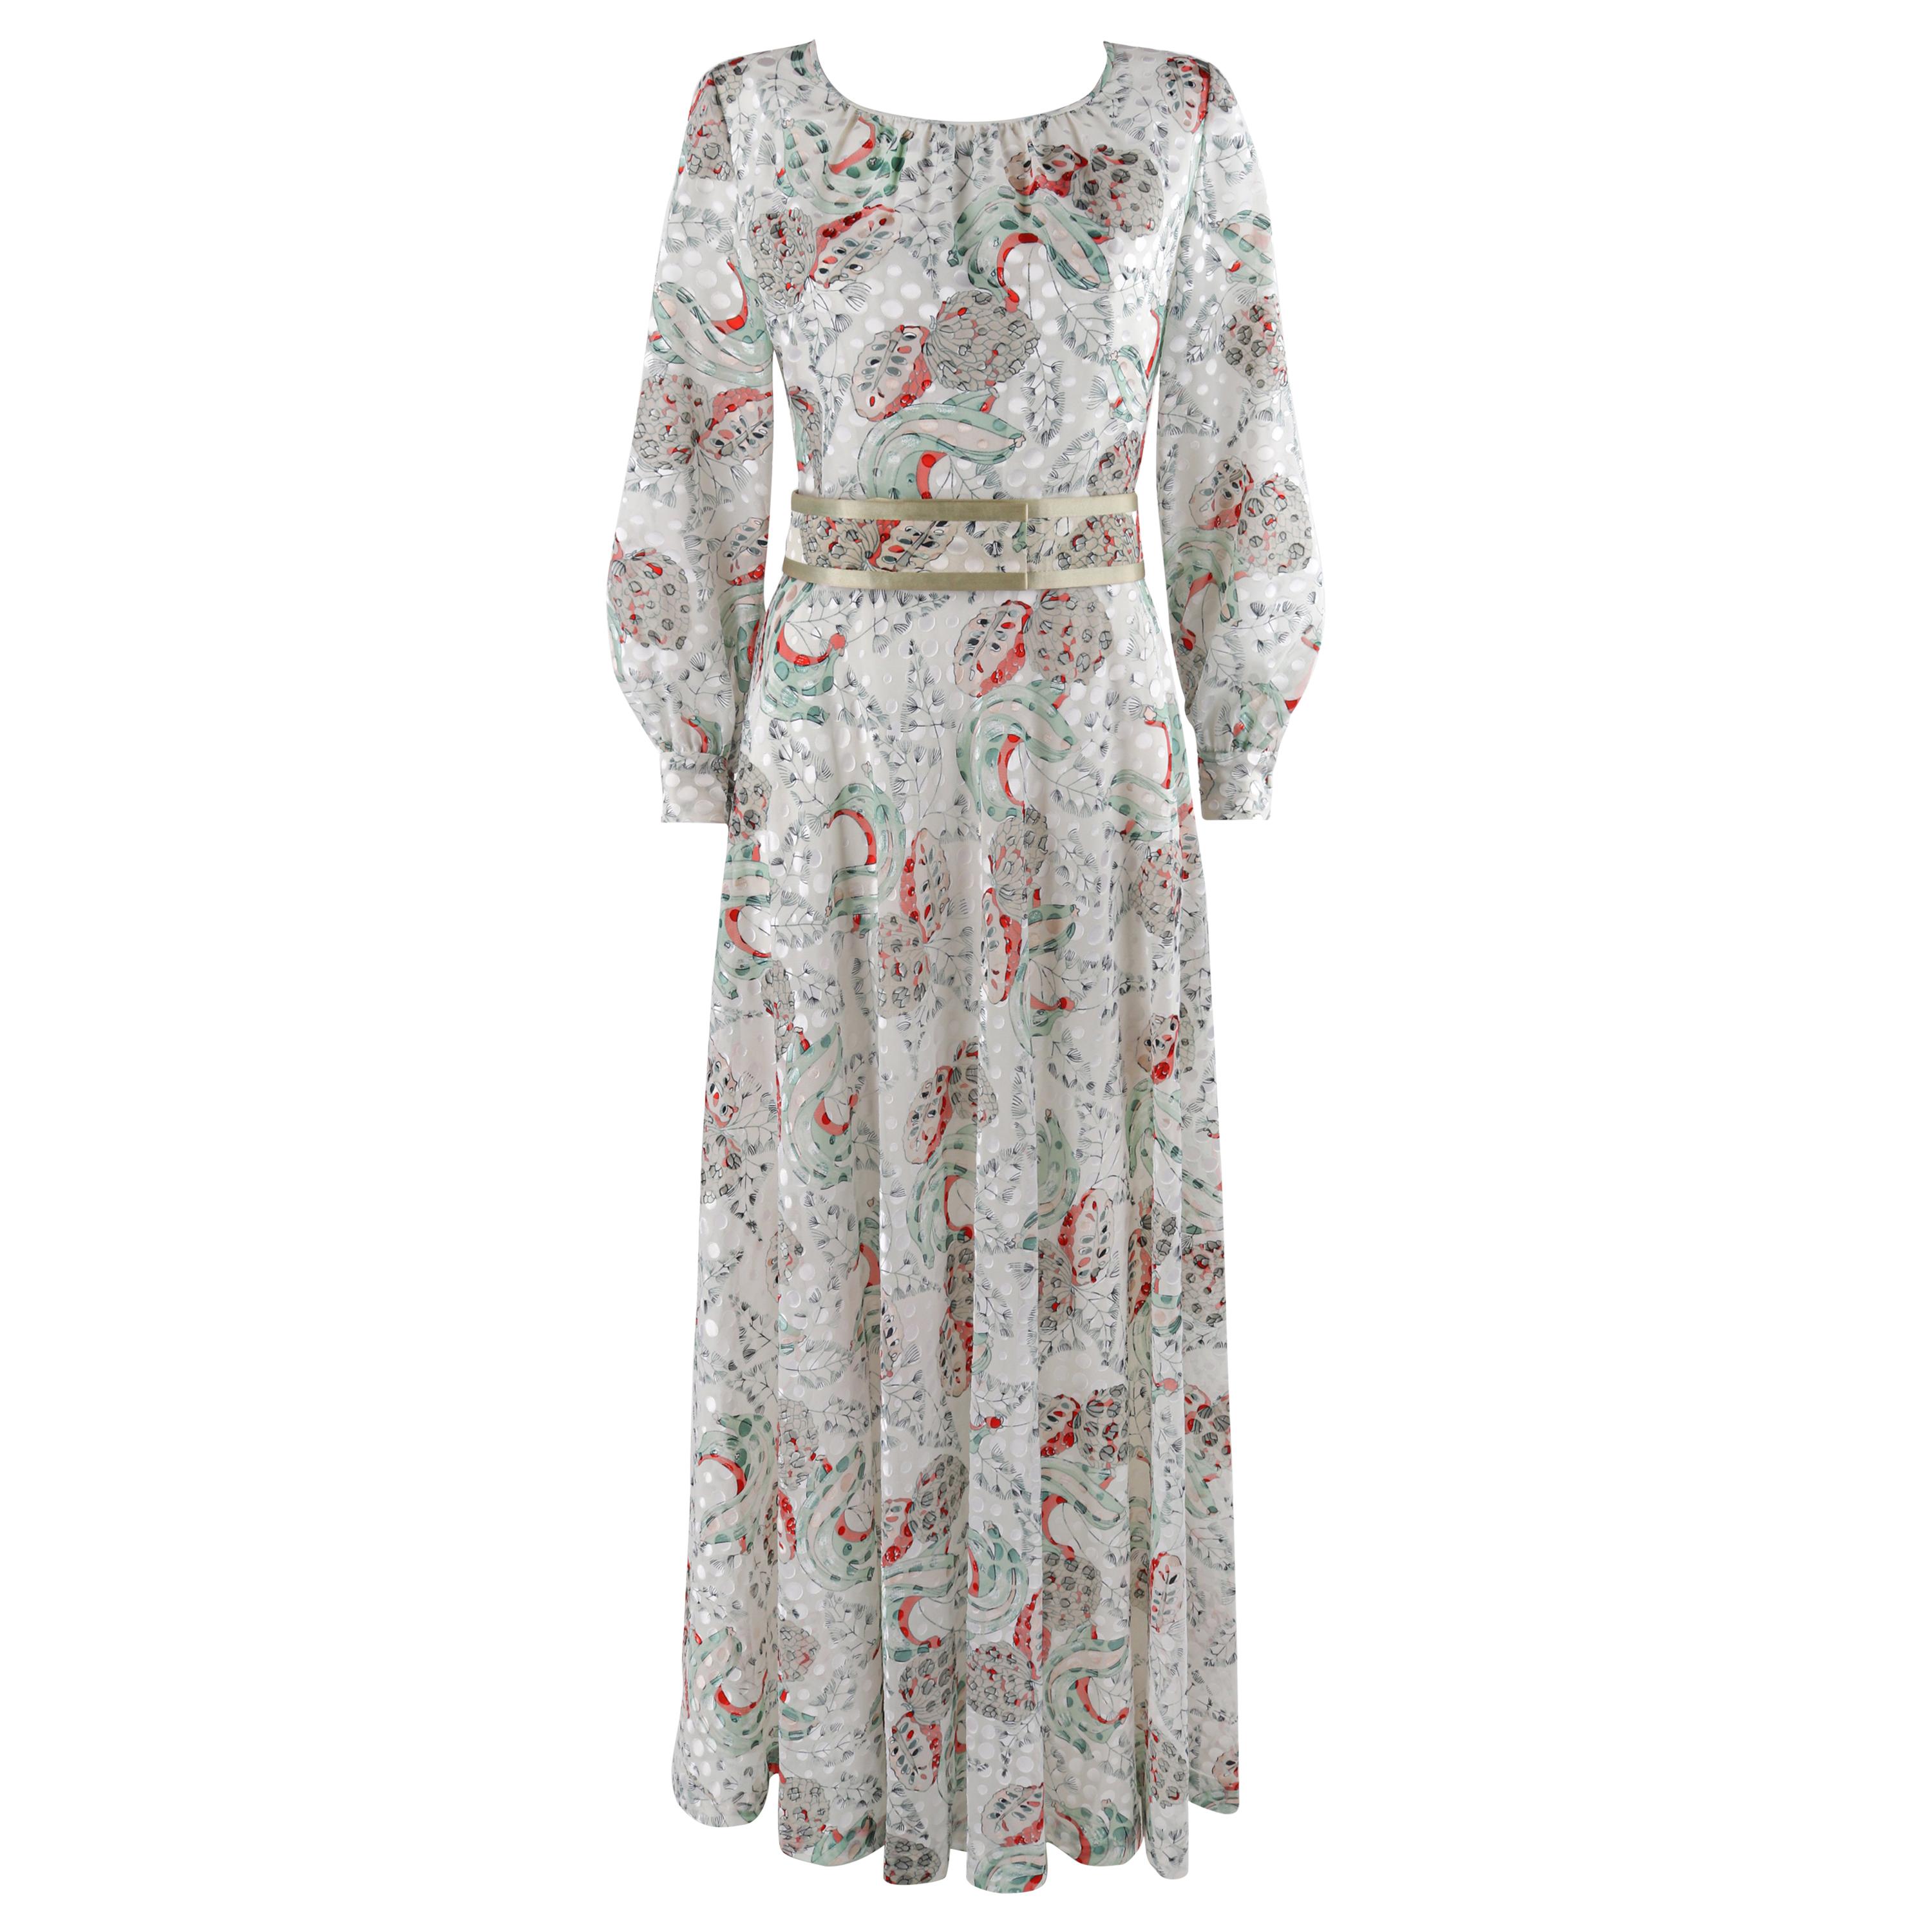 ADELE SIMPSON c.1970’s White Multicolor Floral Fruit Print Belted Maxi Day Dress